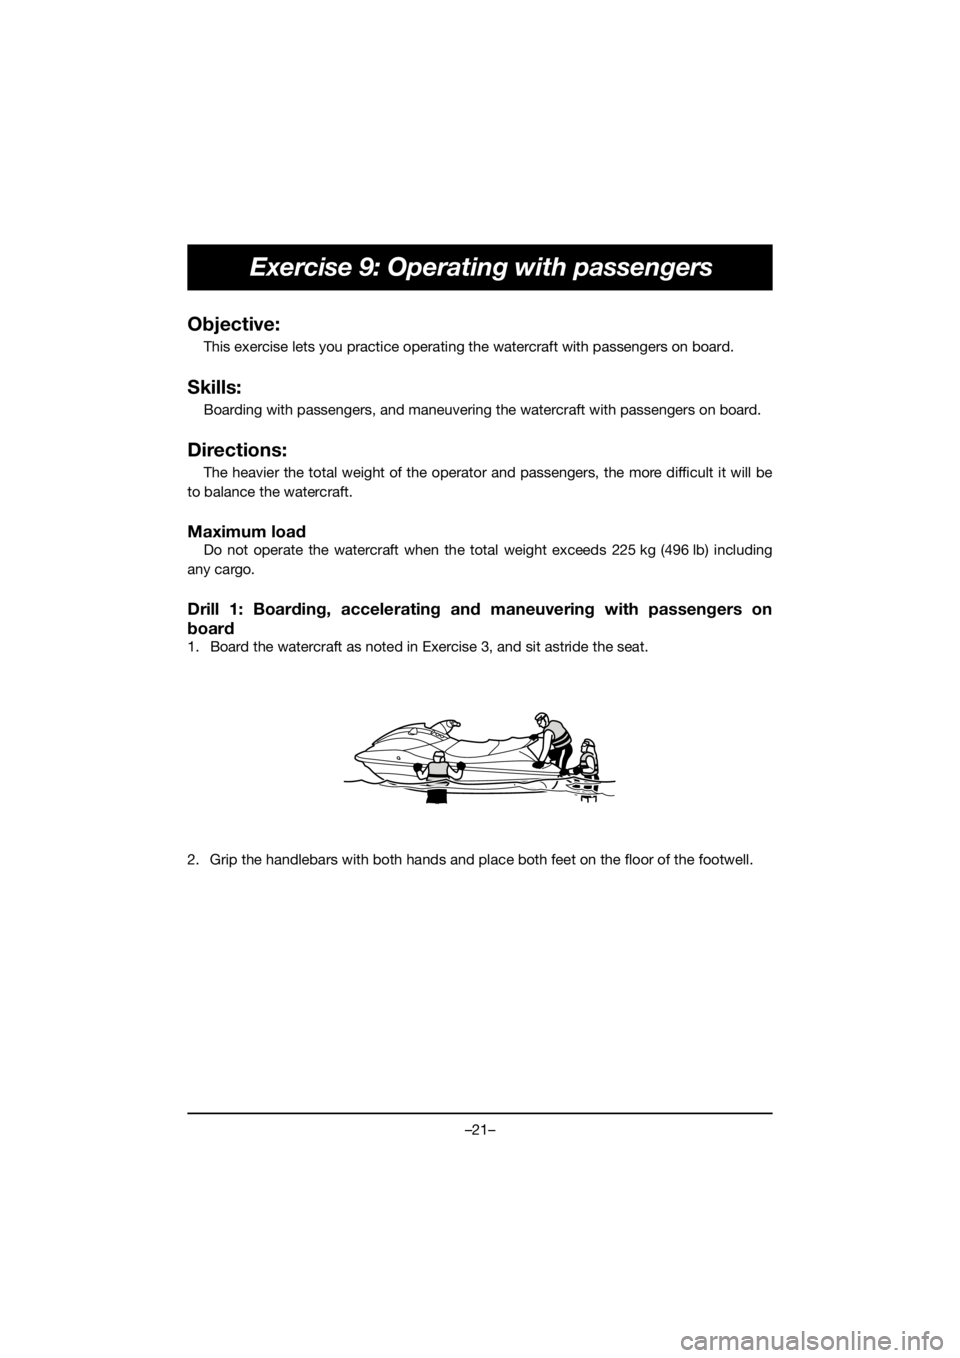 YAMAHA EX 2021  Manuale de Empleo (in Spanish) –21–
Exercise 9: Operating with passengers
Objective:
This exercise lets you practice operating the watercraft with passengers on board.
Skills:
Boarding with passengers, and maneuvering the water